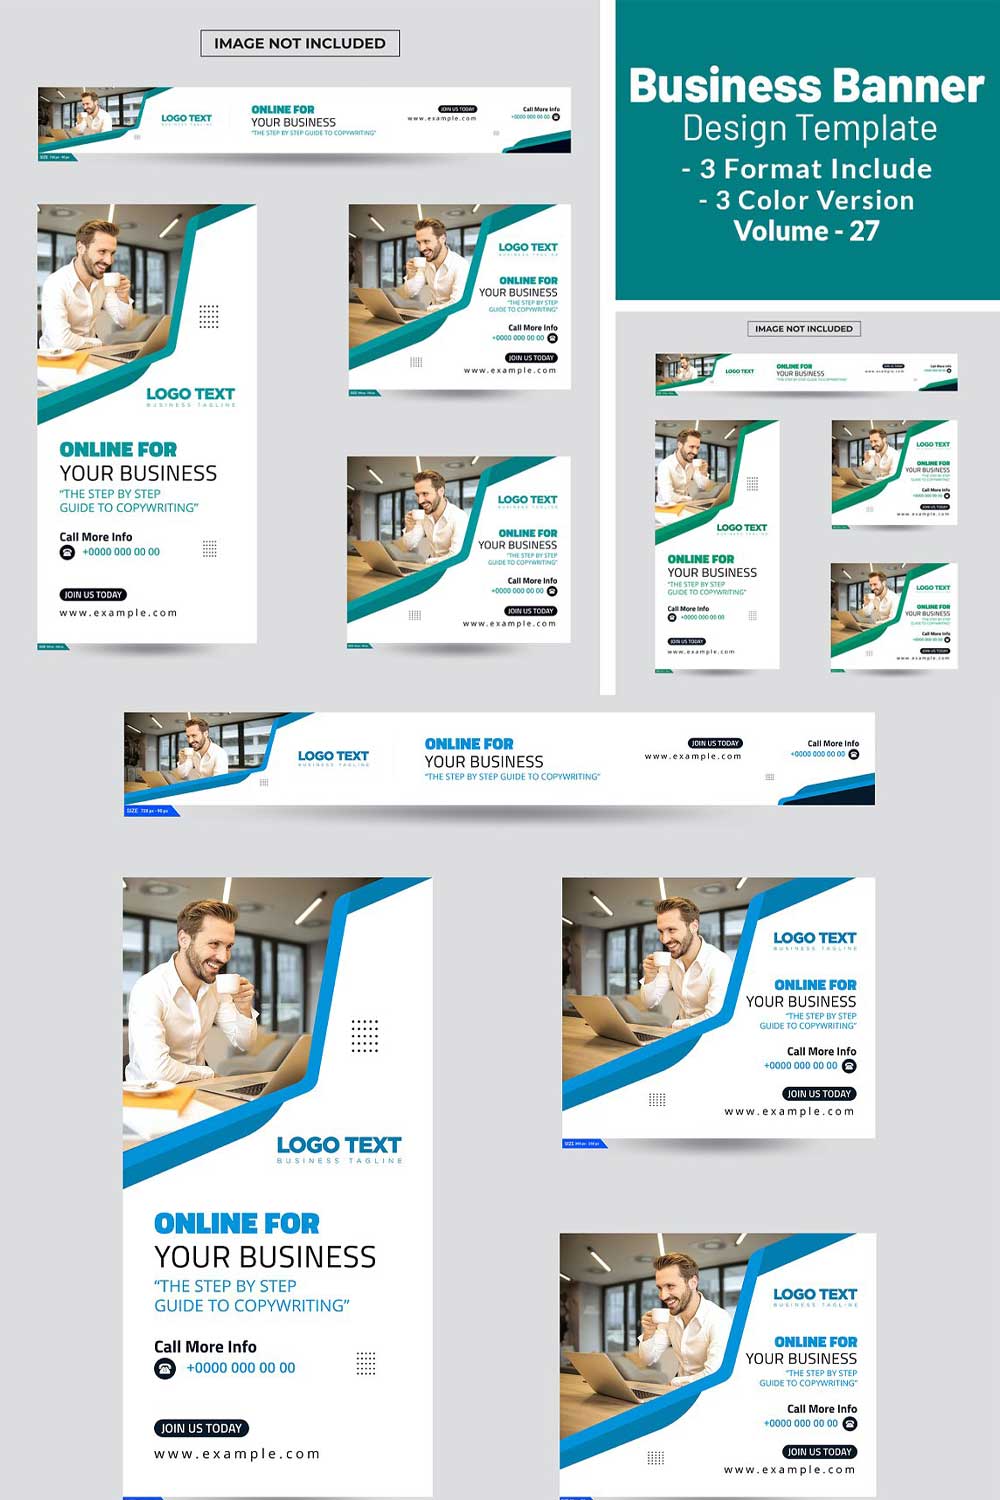 Business Banner Design Template pinterest preview image.